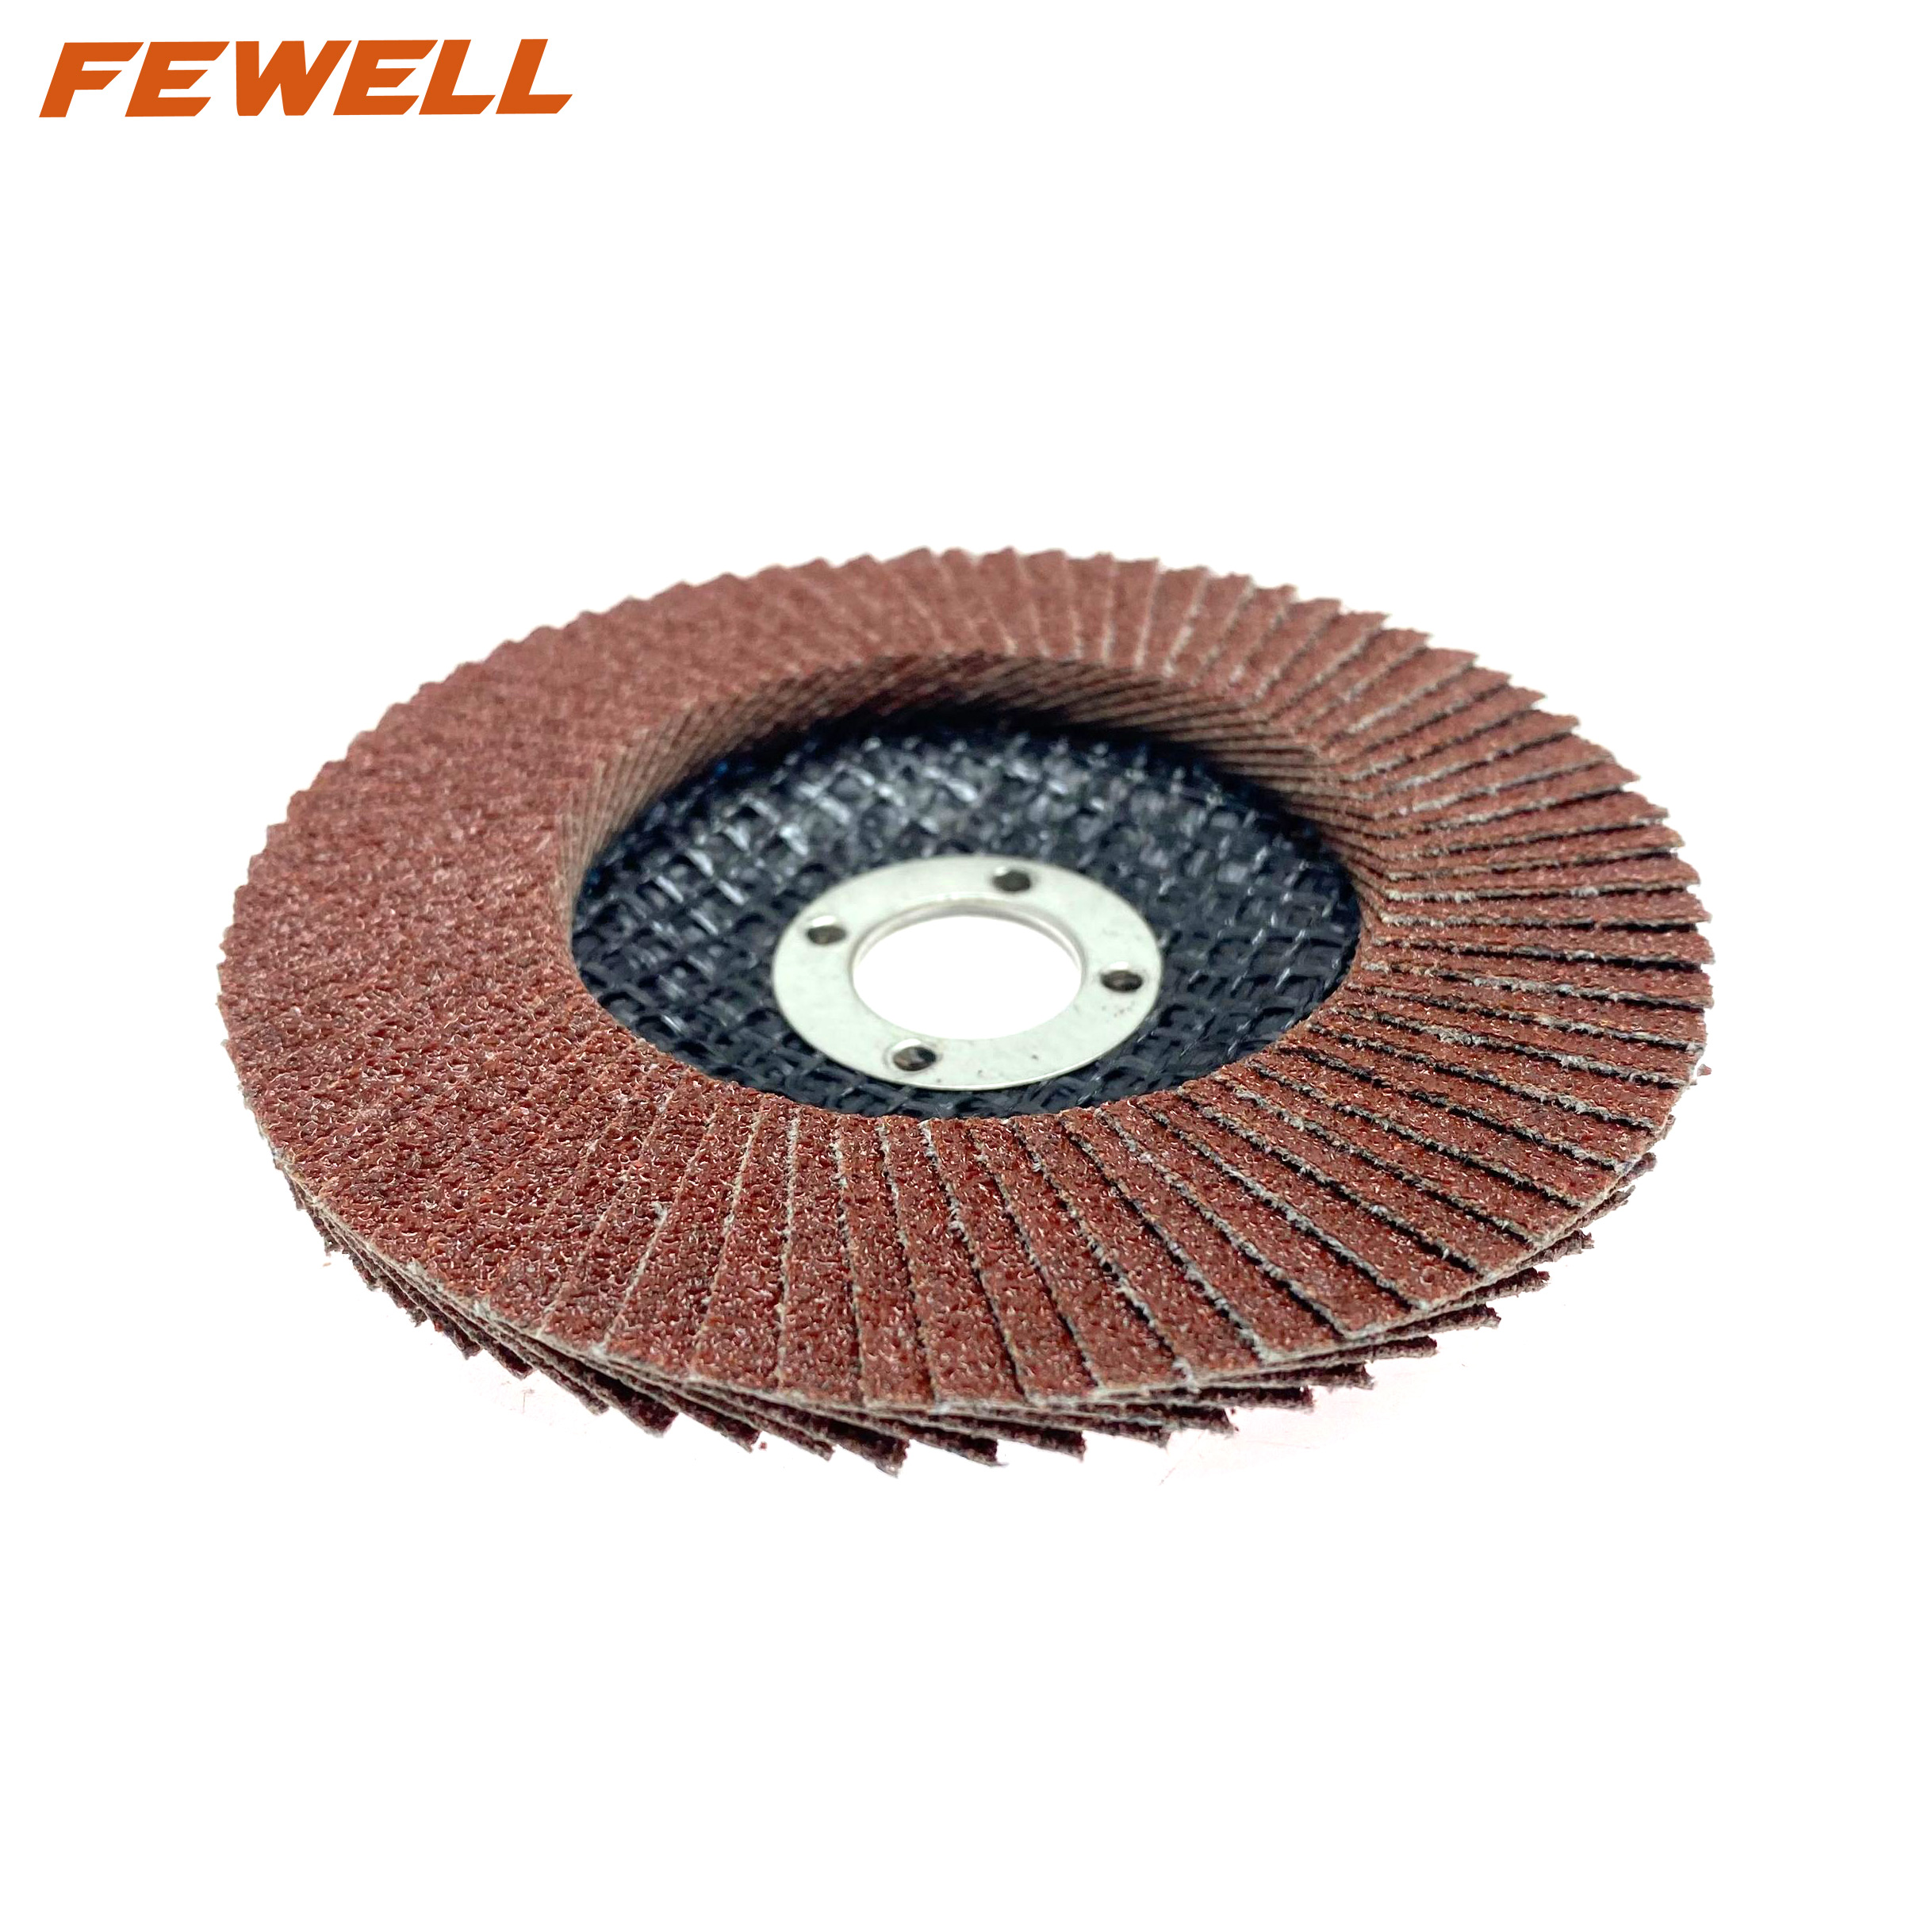 High quality 4-7inch 100-180mm silicone carbide abrasive wheel flexible sanding flap disc for grinding metal stainless steel